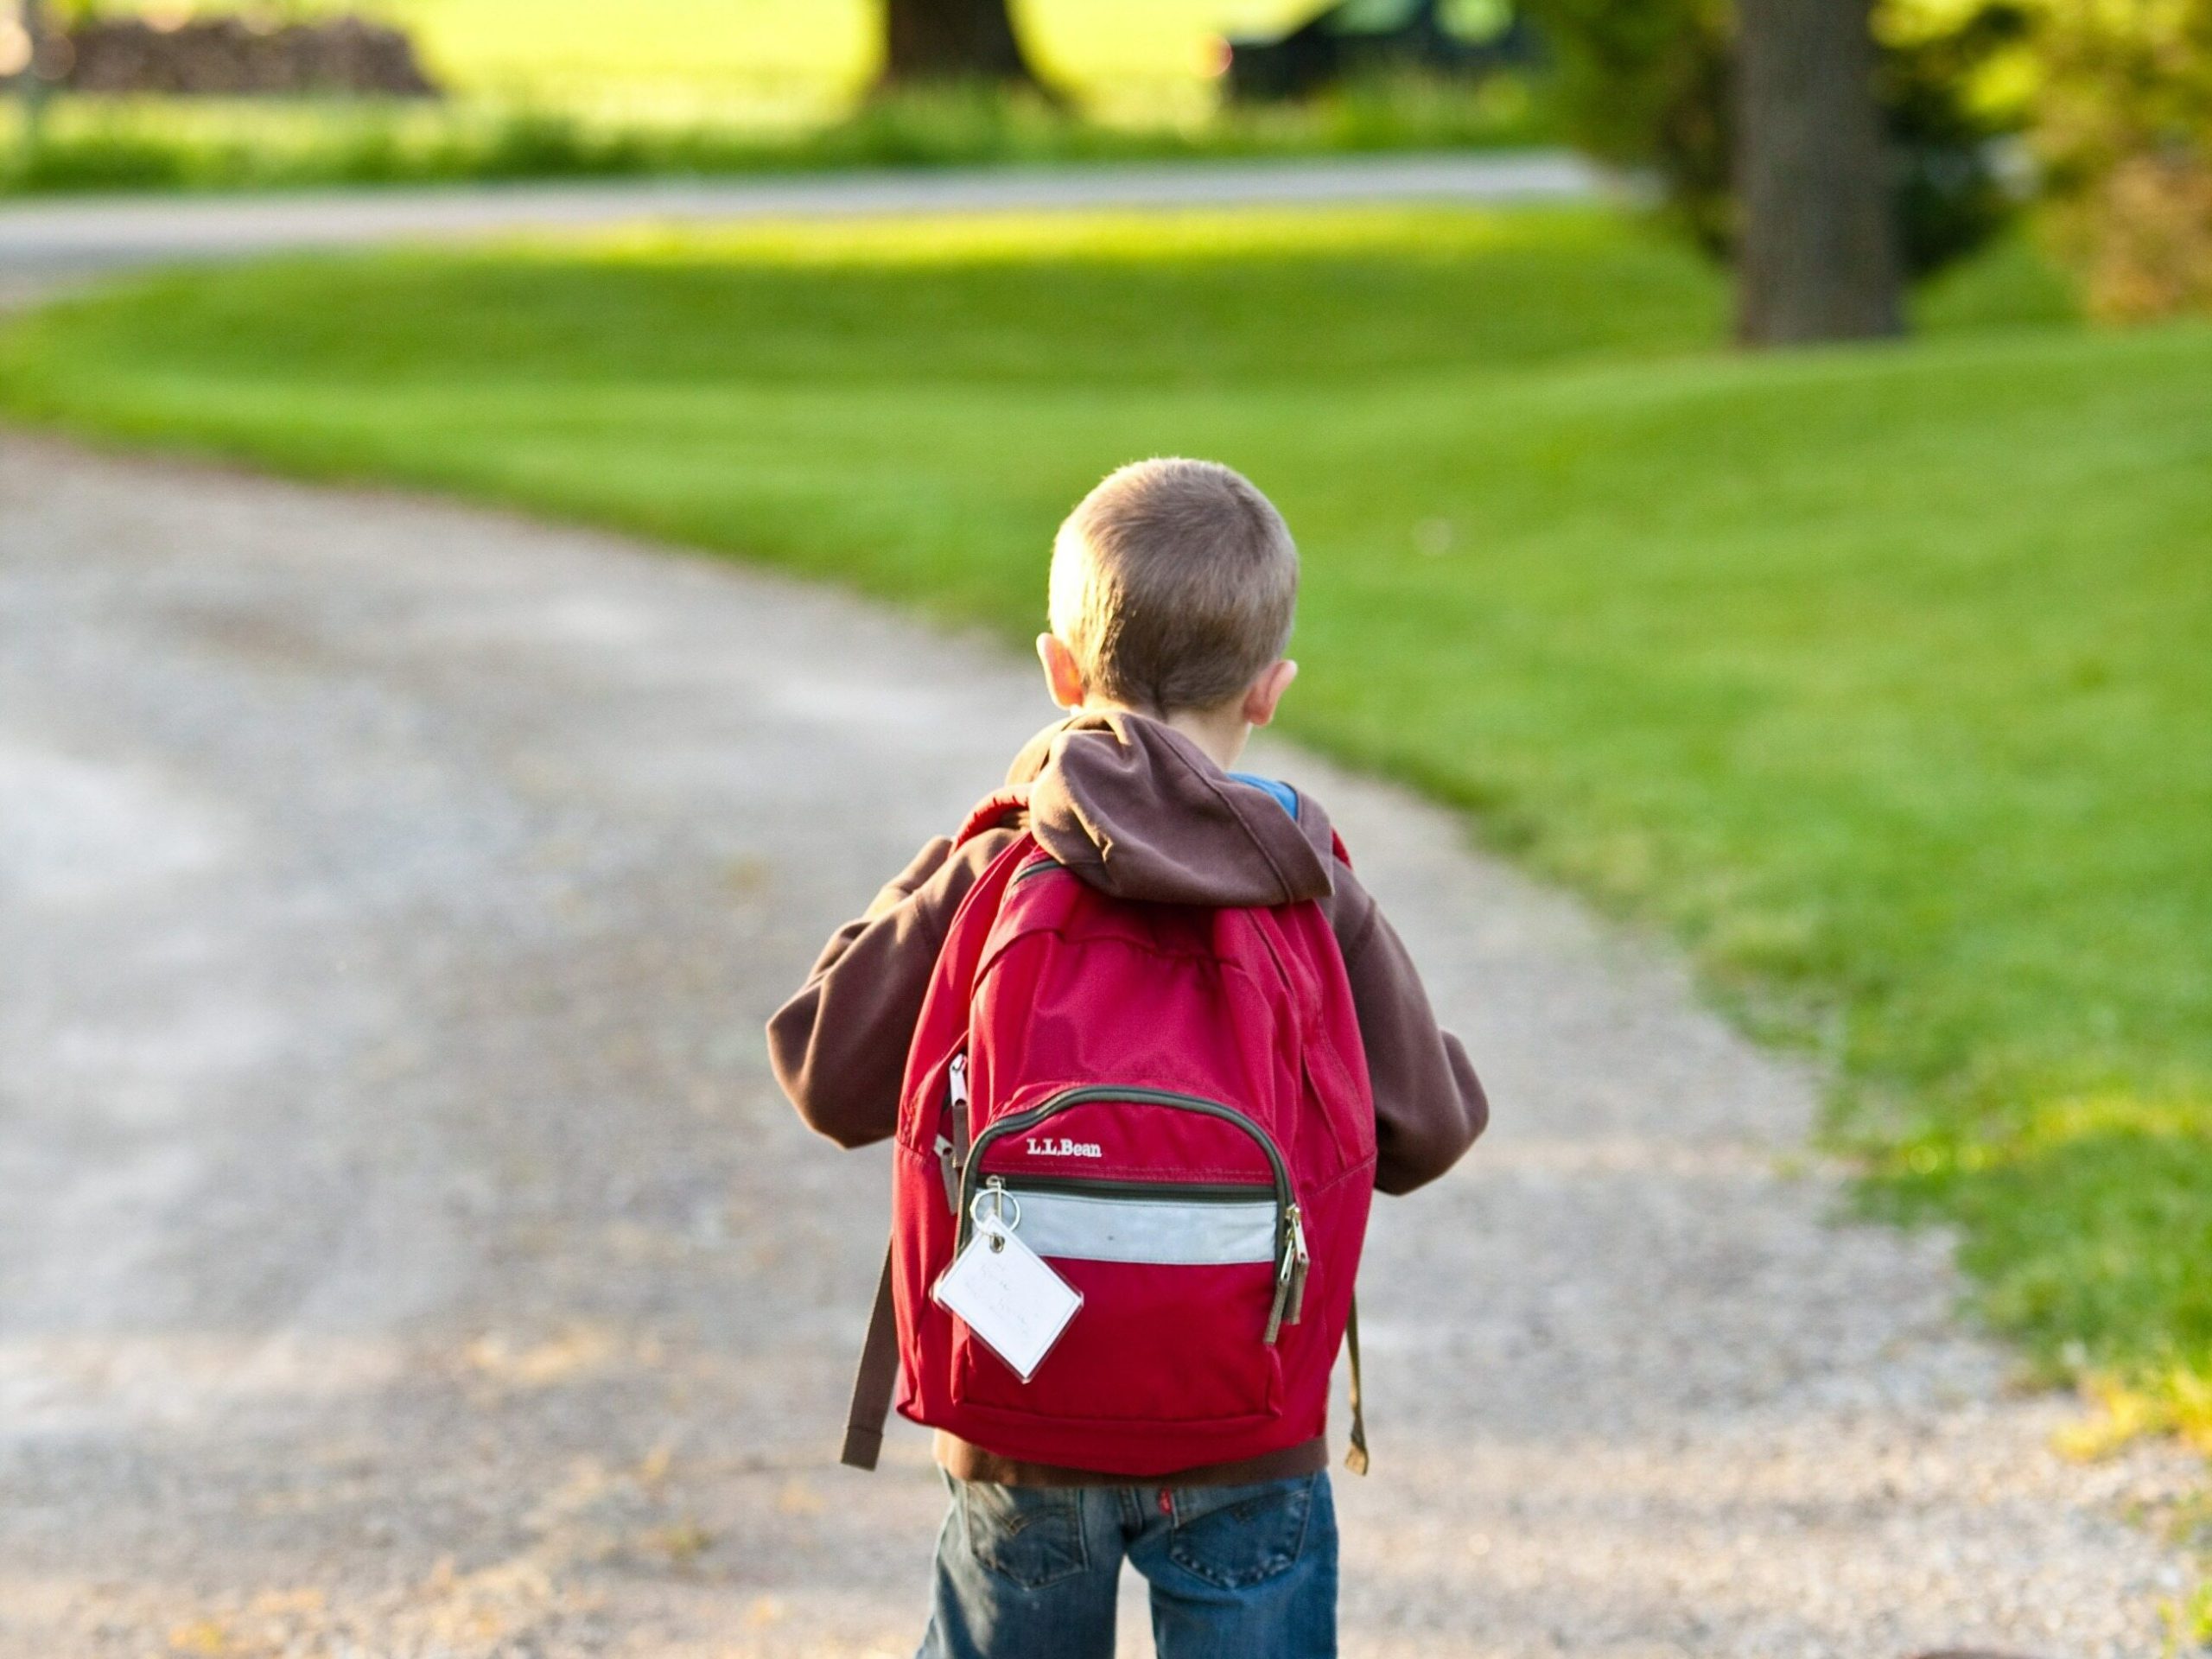 Children hunched like camels.  What are the dangers of carrying a heavy backpack?